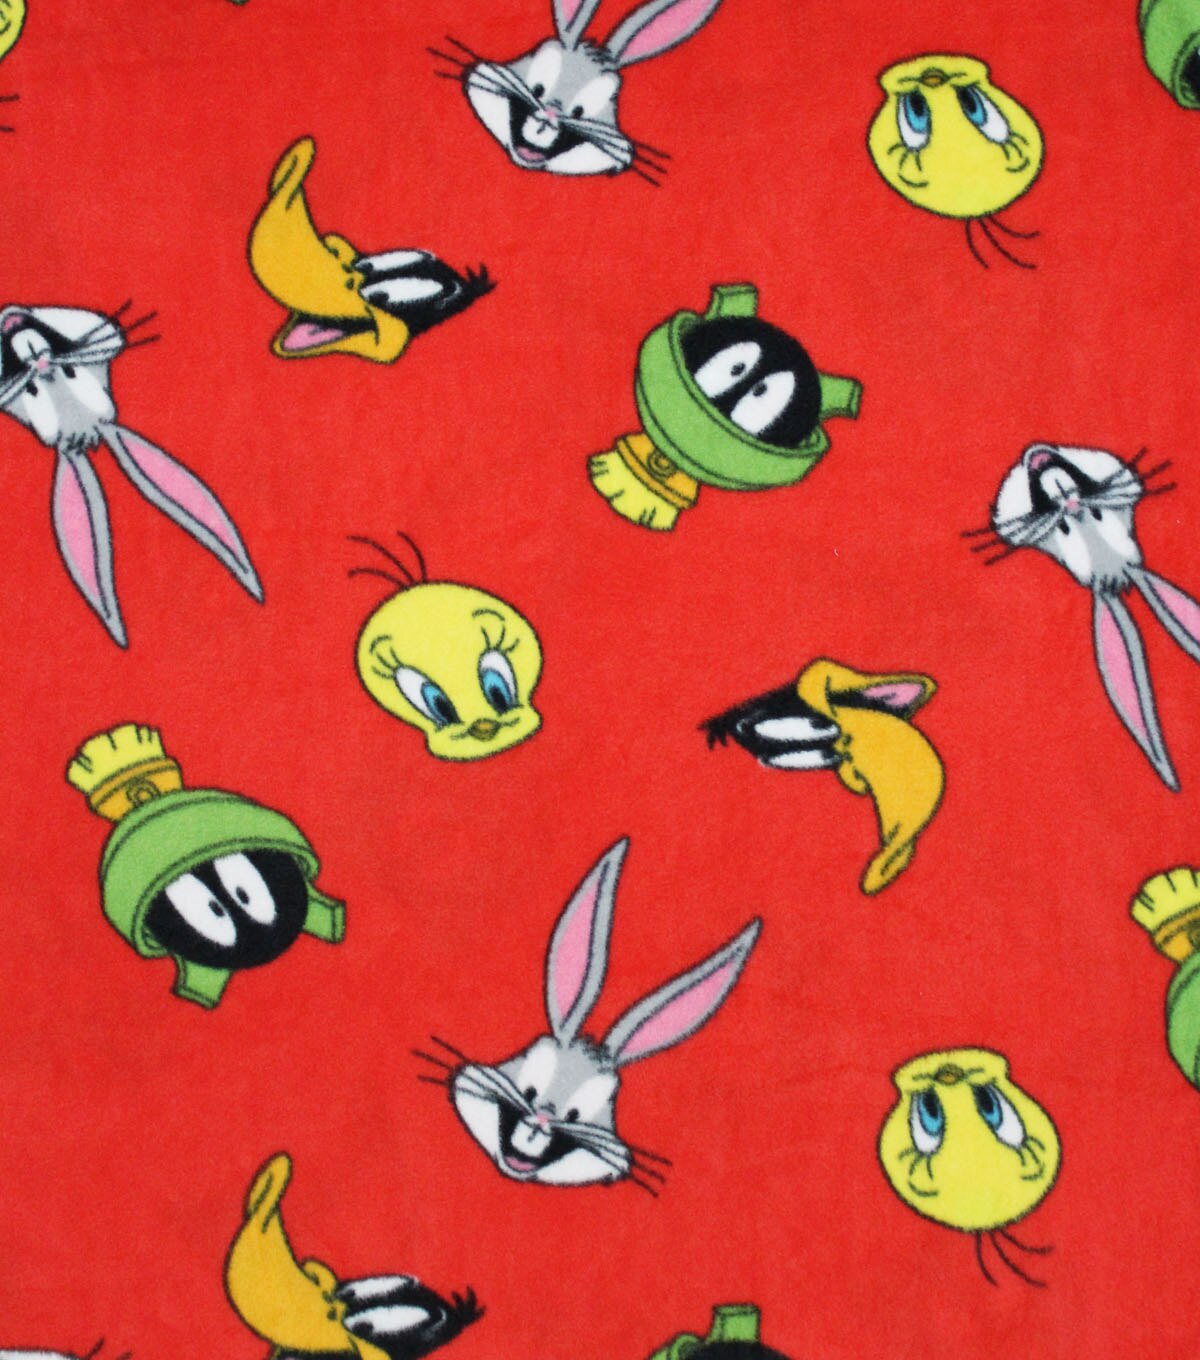 Looney Tunes Fleece Fabric Tosses Faces | JOANN - A Day At The Links Looney Tunes Value